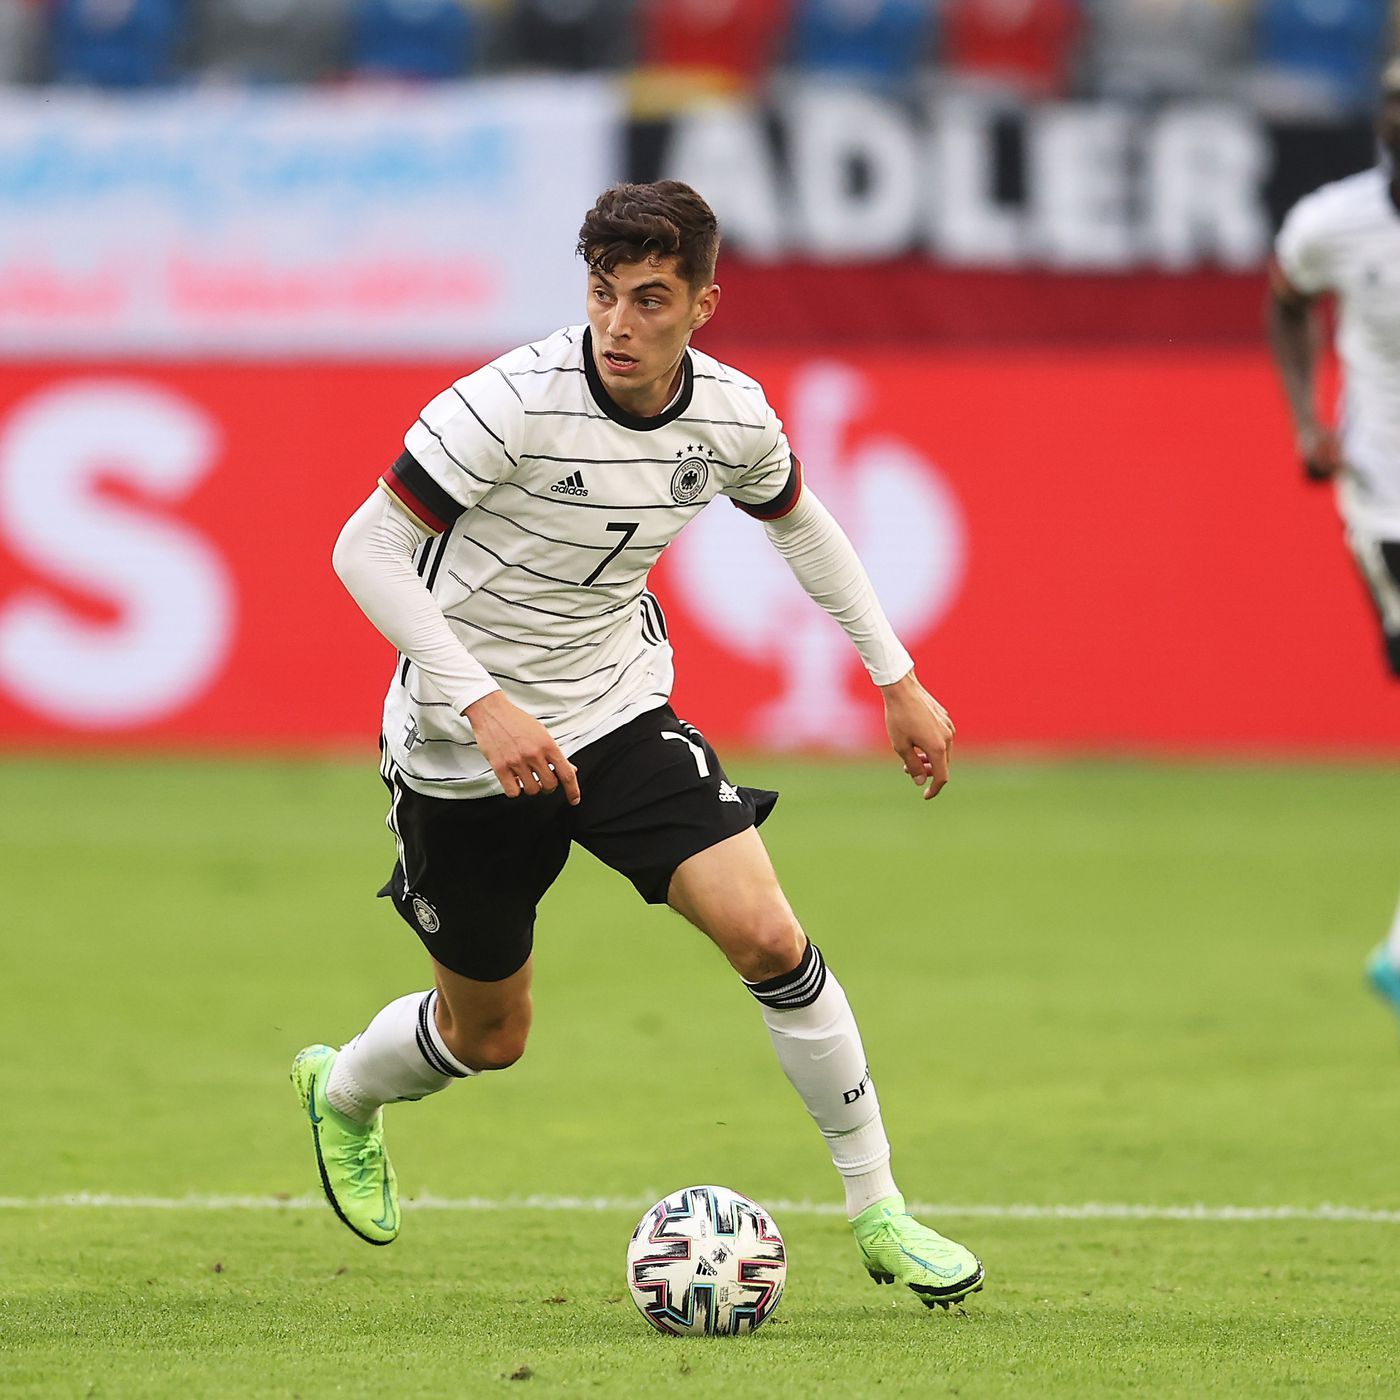 Havertz Goes Ham, Werner Scores, Too In 7 1 Win For Germany Over Latvia Ain't Got No History